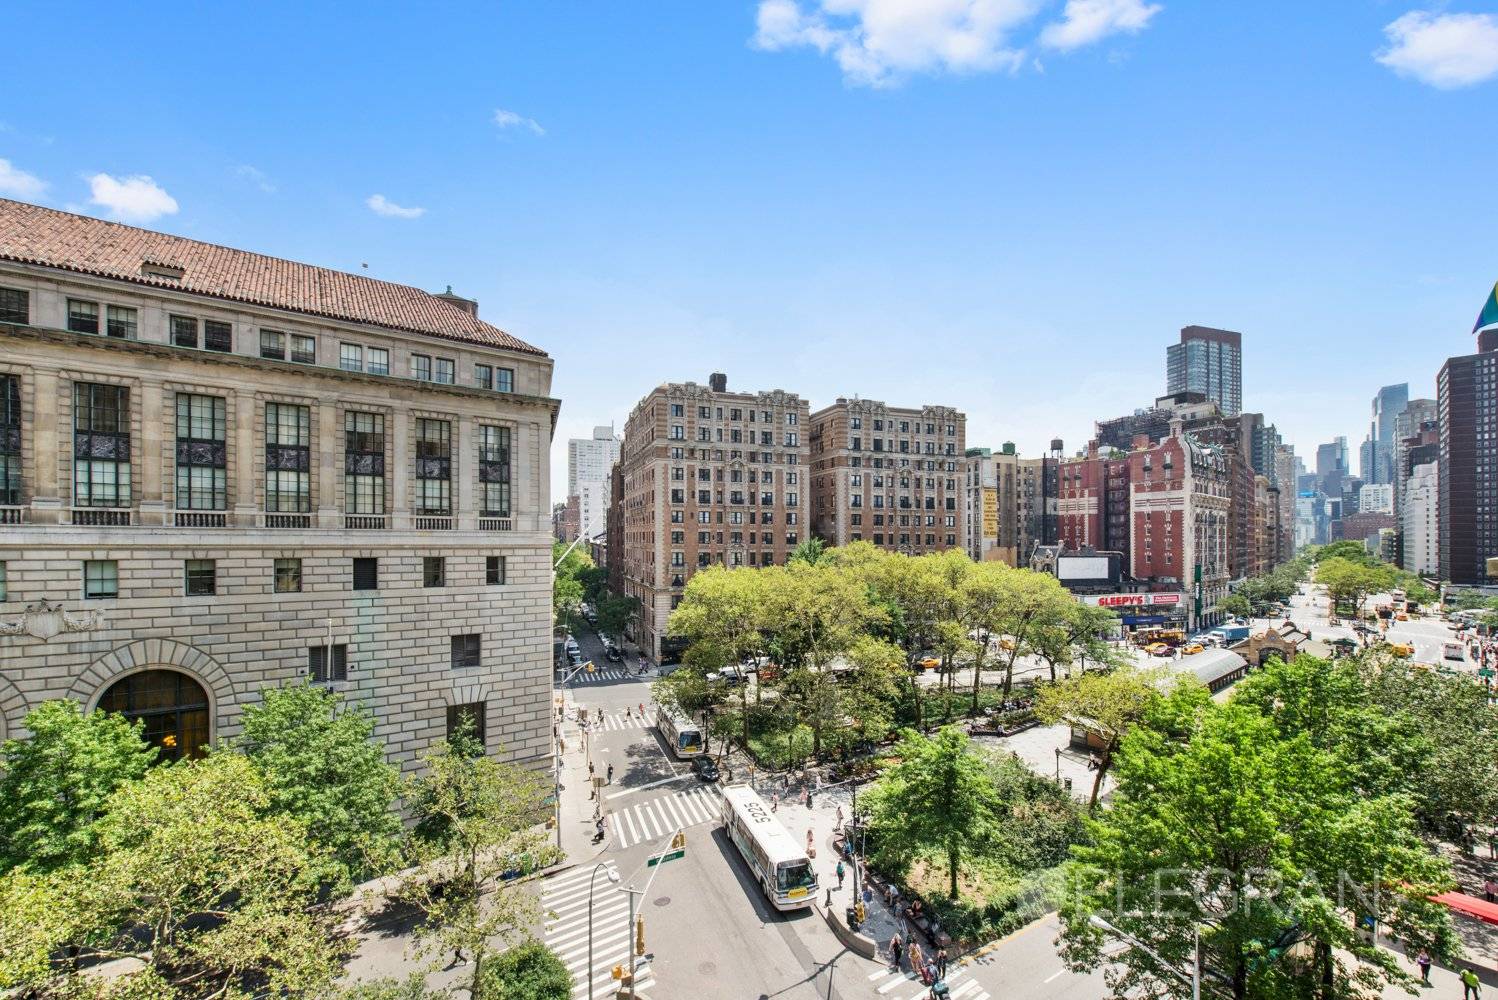 This is the chance to create a massive, one of a kind masterpiece, in one of the most historic buildings on the Upper West Side.